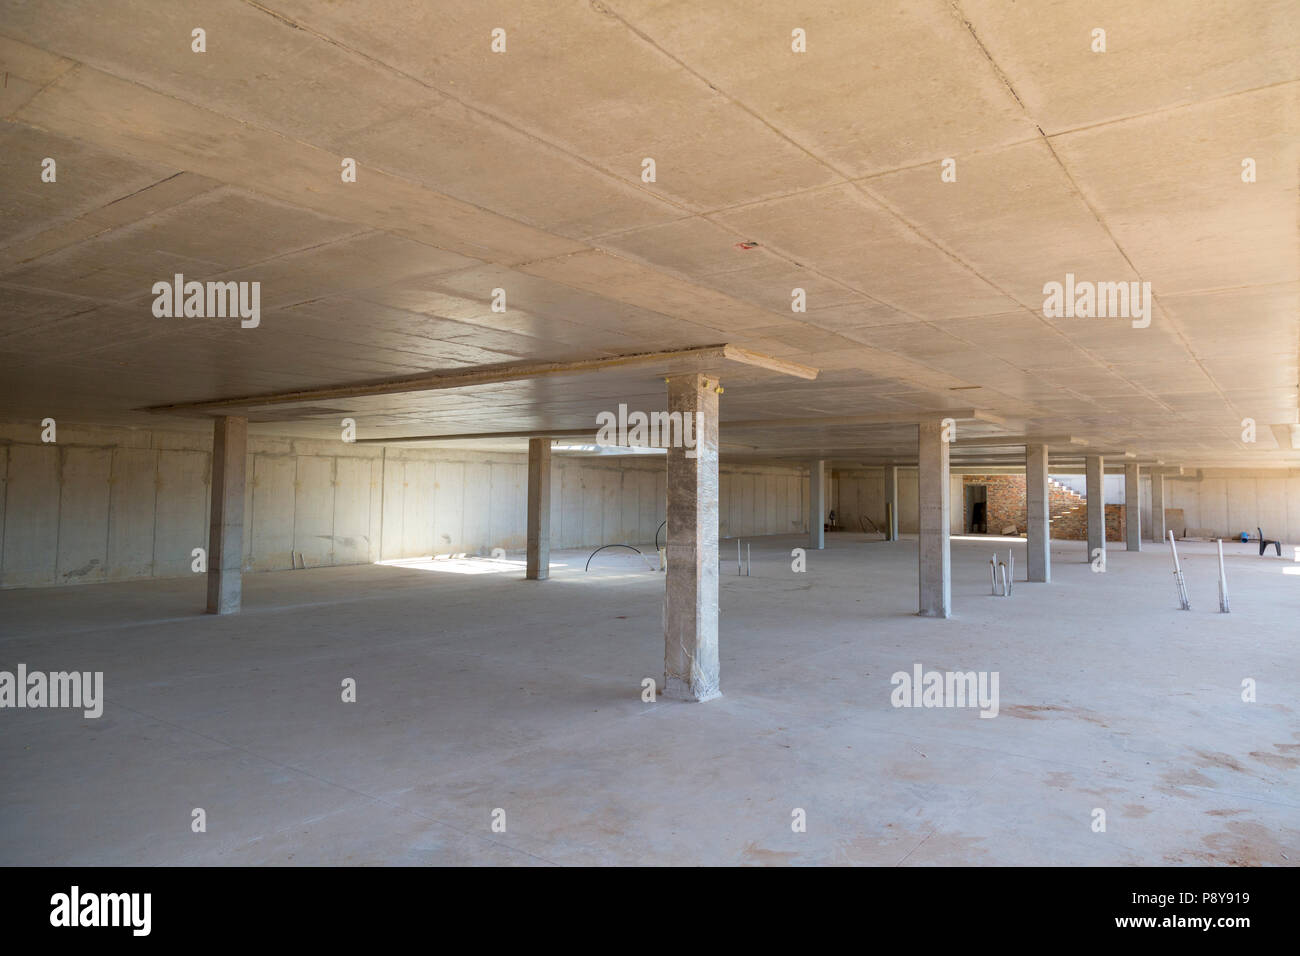 Empty basement area in a building under construction Stock Photo